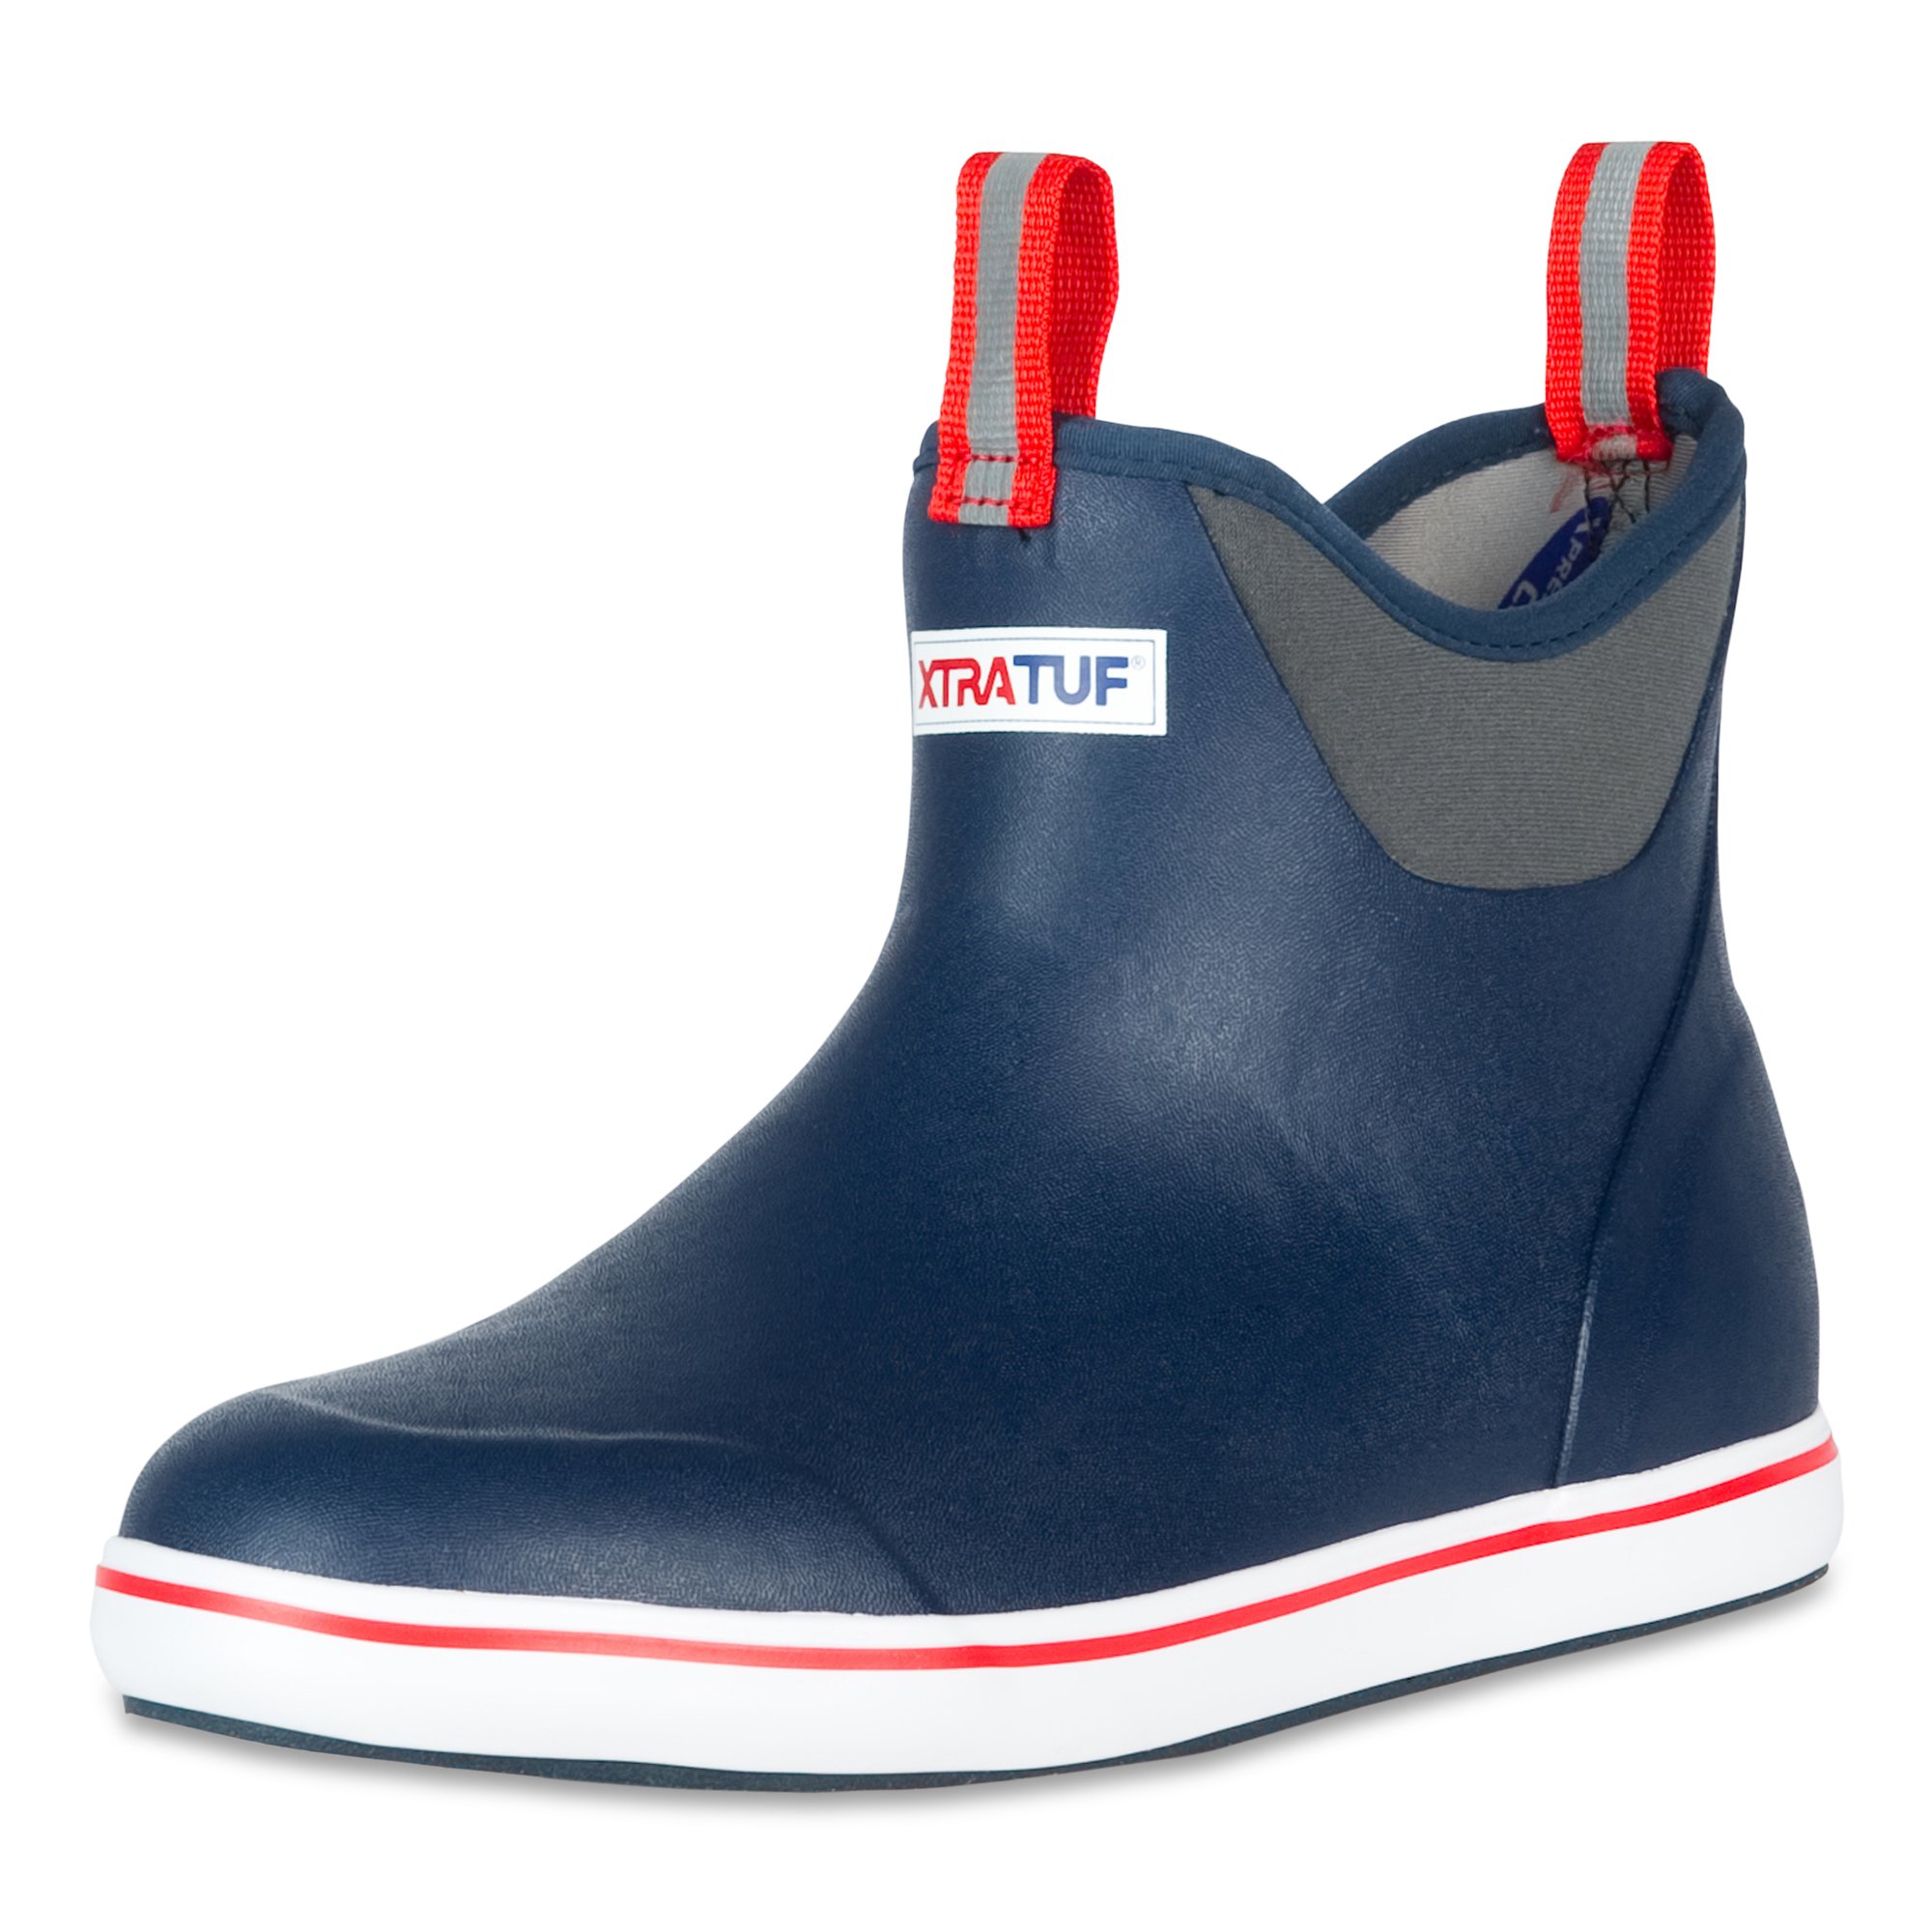 XTRATUF Performance Series 6 Inch Mens Full Rubber Ankle Deck Boots - Navy & Red  - Size 10